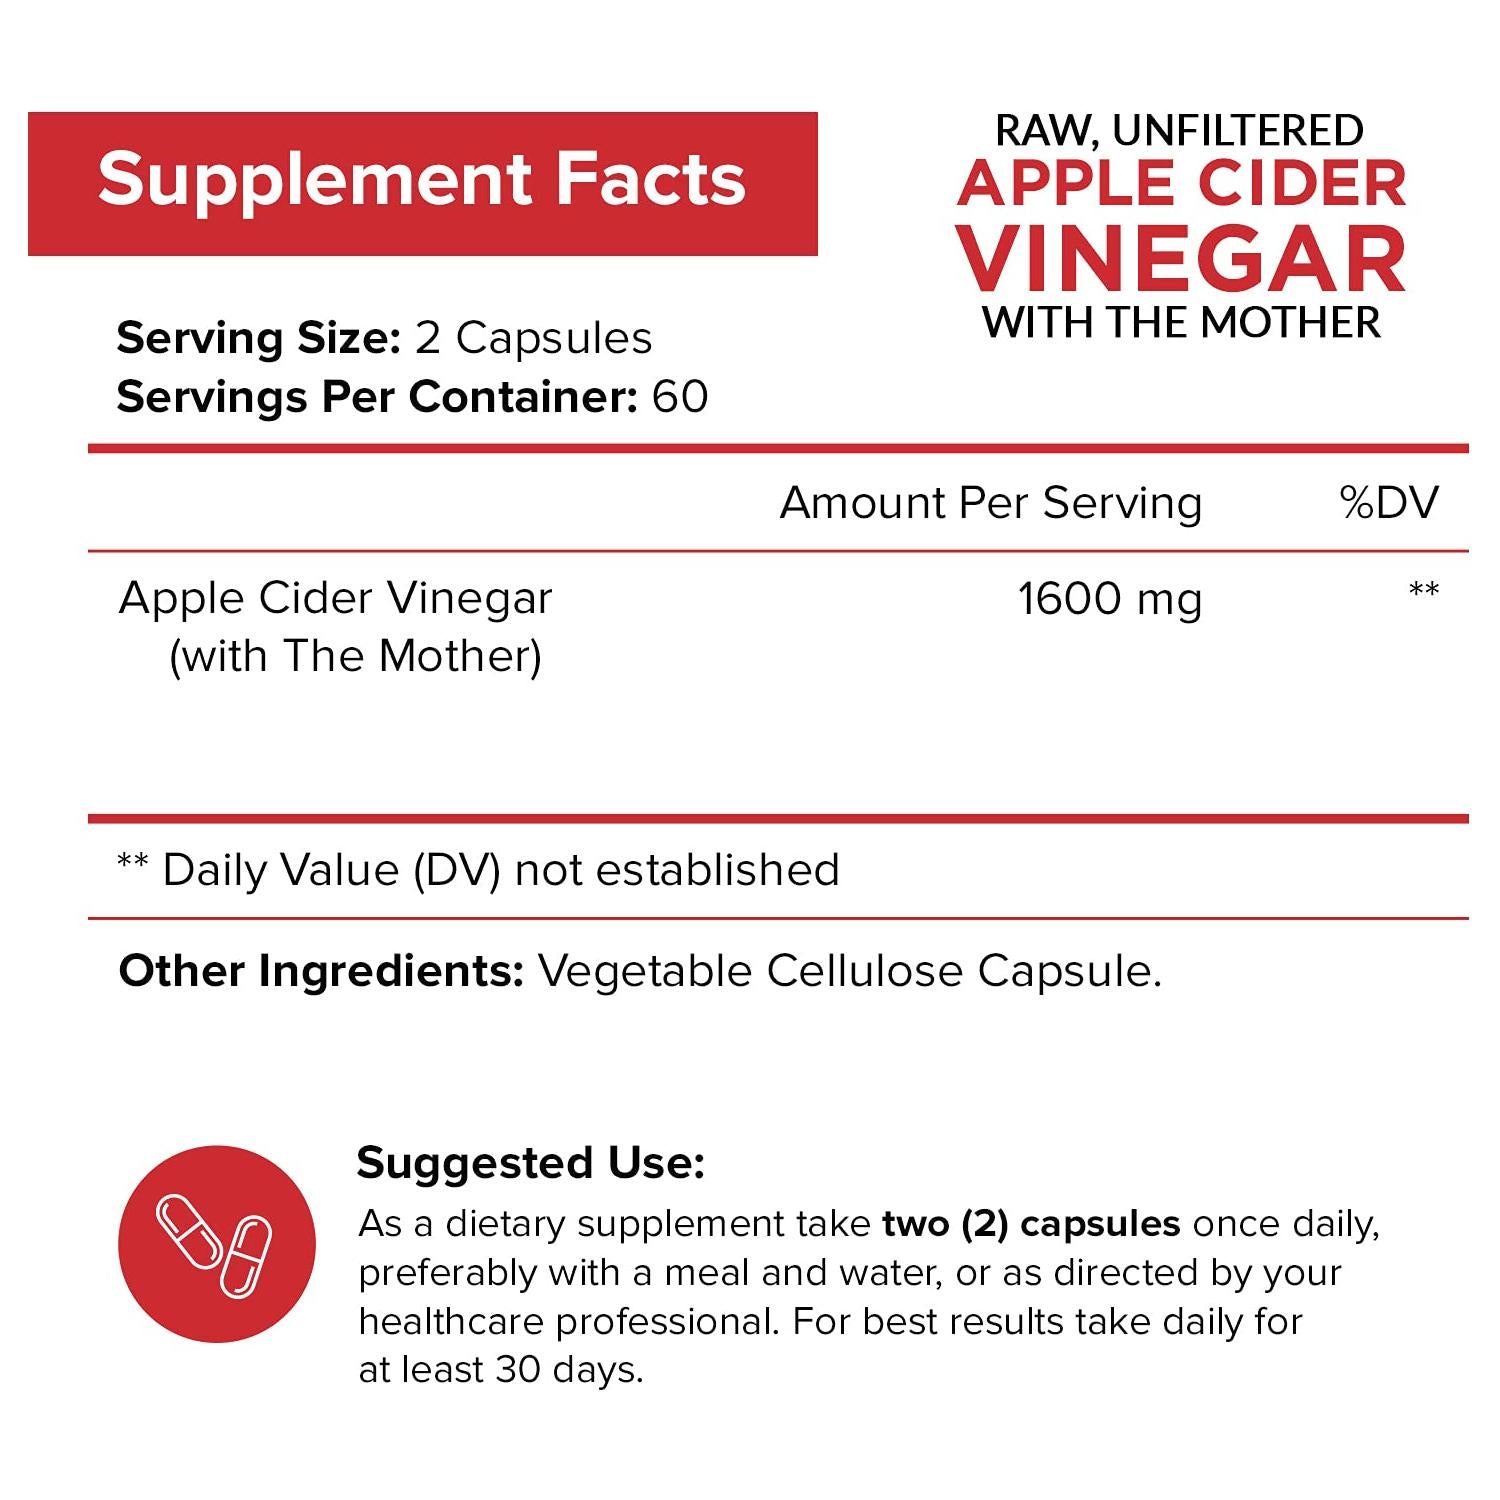 Apple Cider Vinegar Capsules with The Mother - 120 Vegan ACV Pills - Best Supplement for Healthy Weight Loss, Diet, Keto, Digestion, Detox, Immune - Powerful Cleanser &amp; Appetite Suppressant Non-GMO